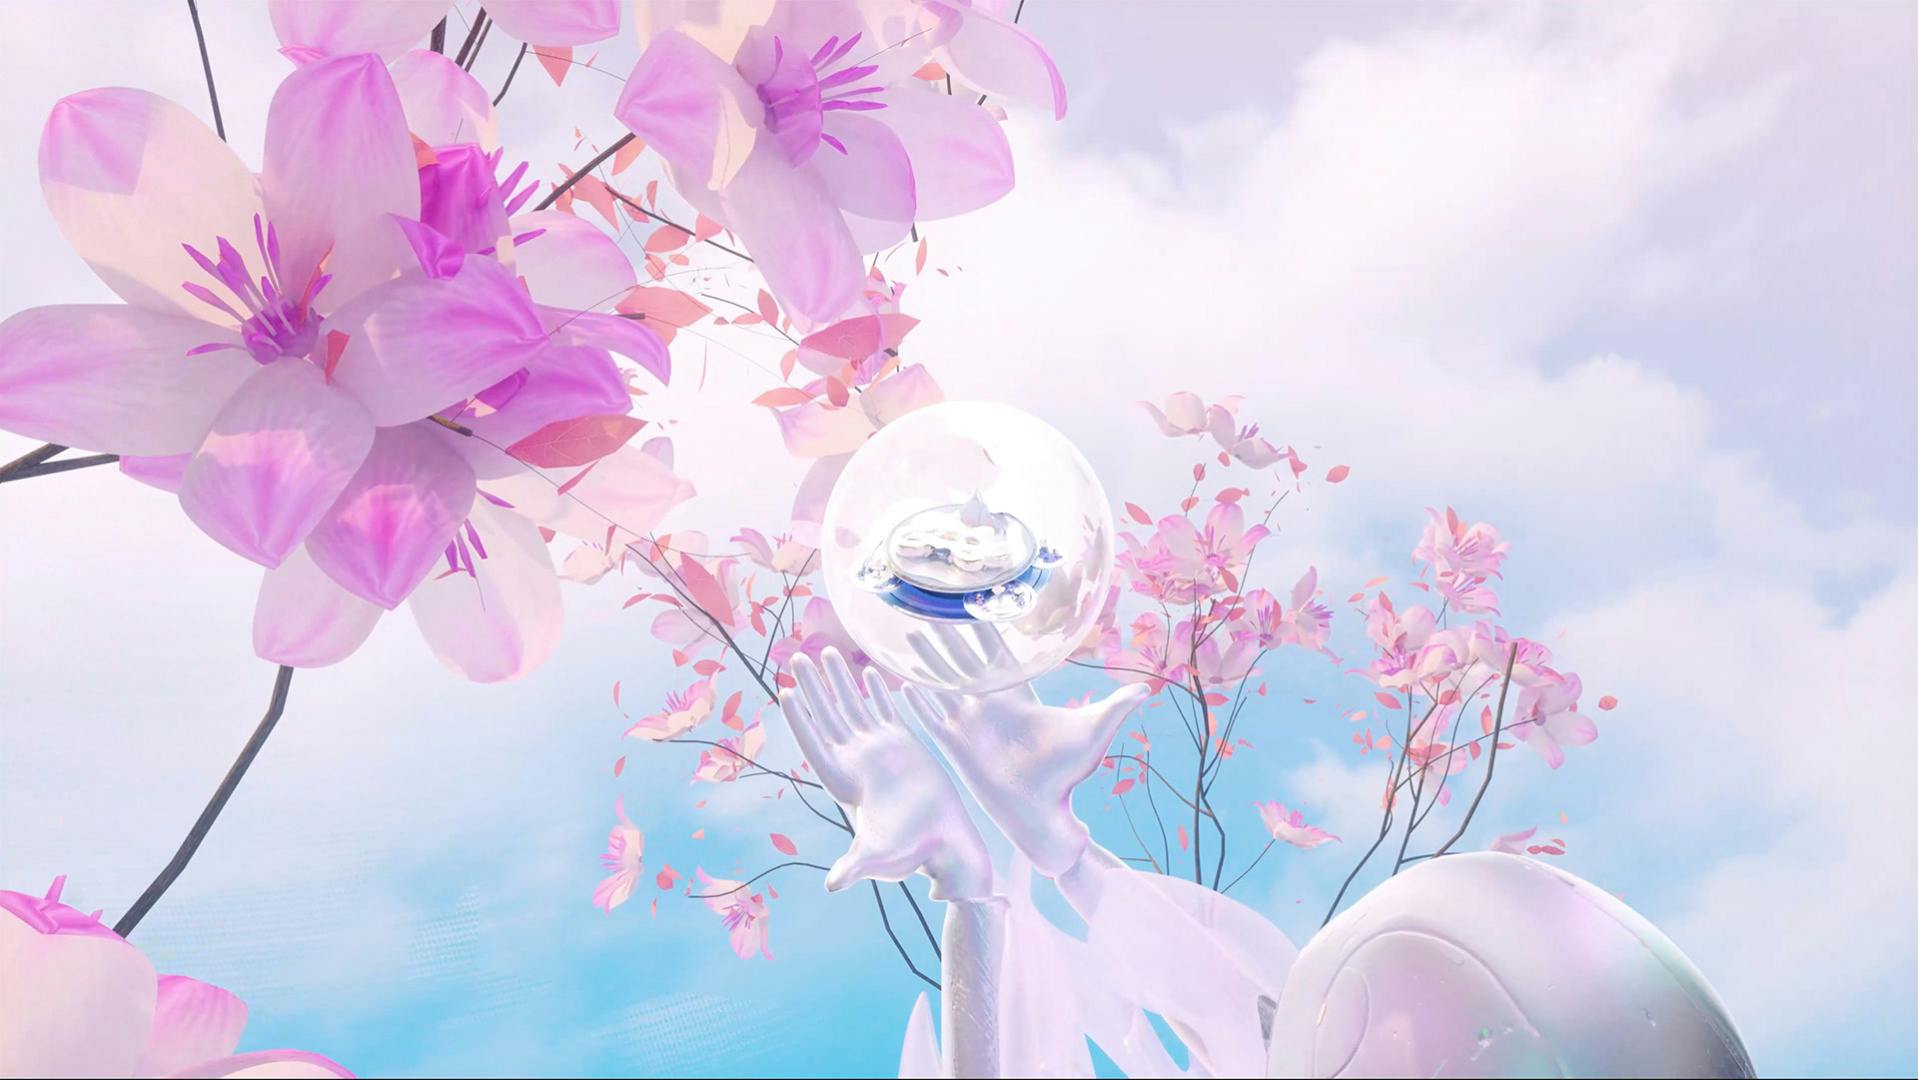 Graphic shows a fantasy landscape with blue skies and blossom trees